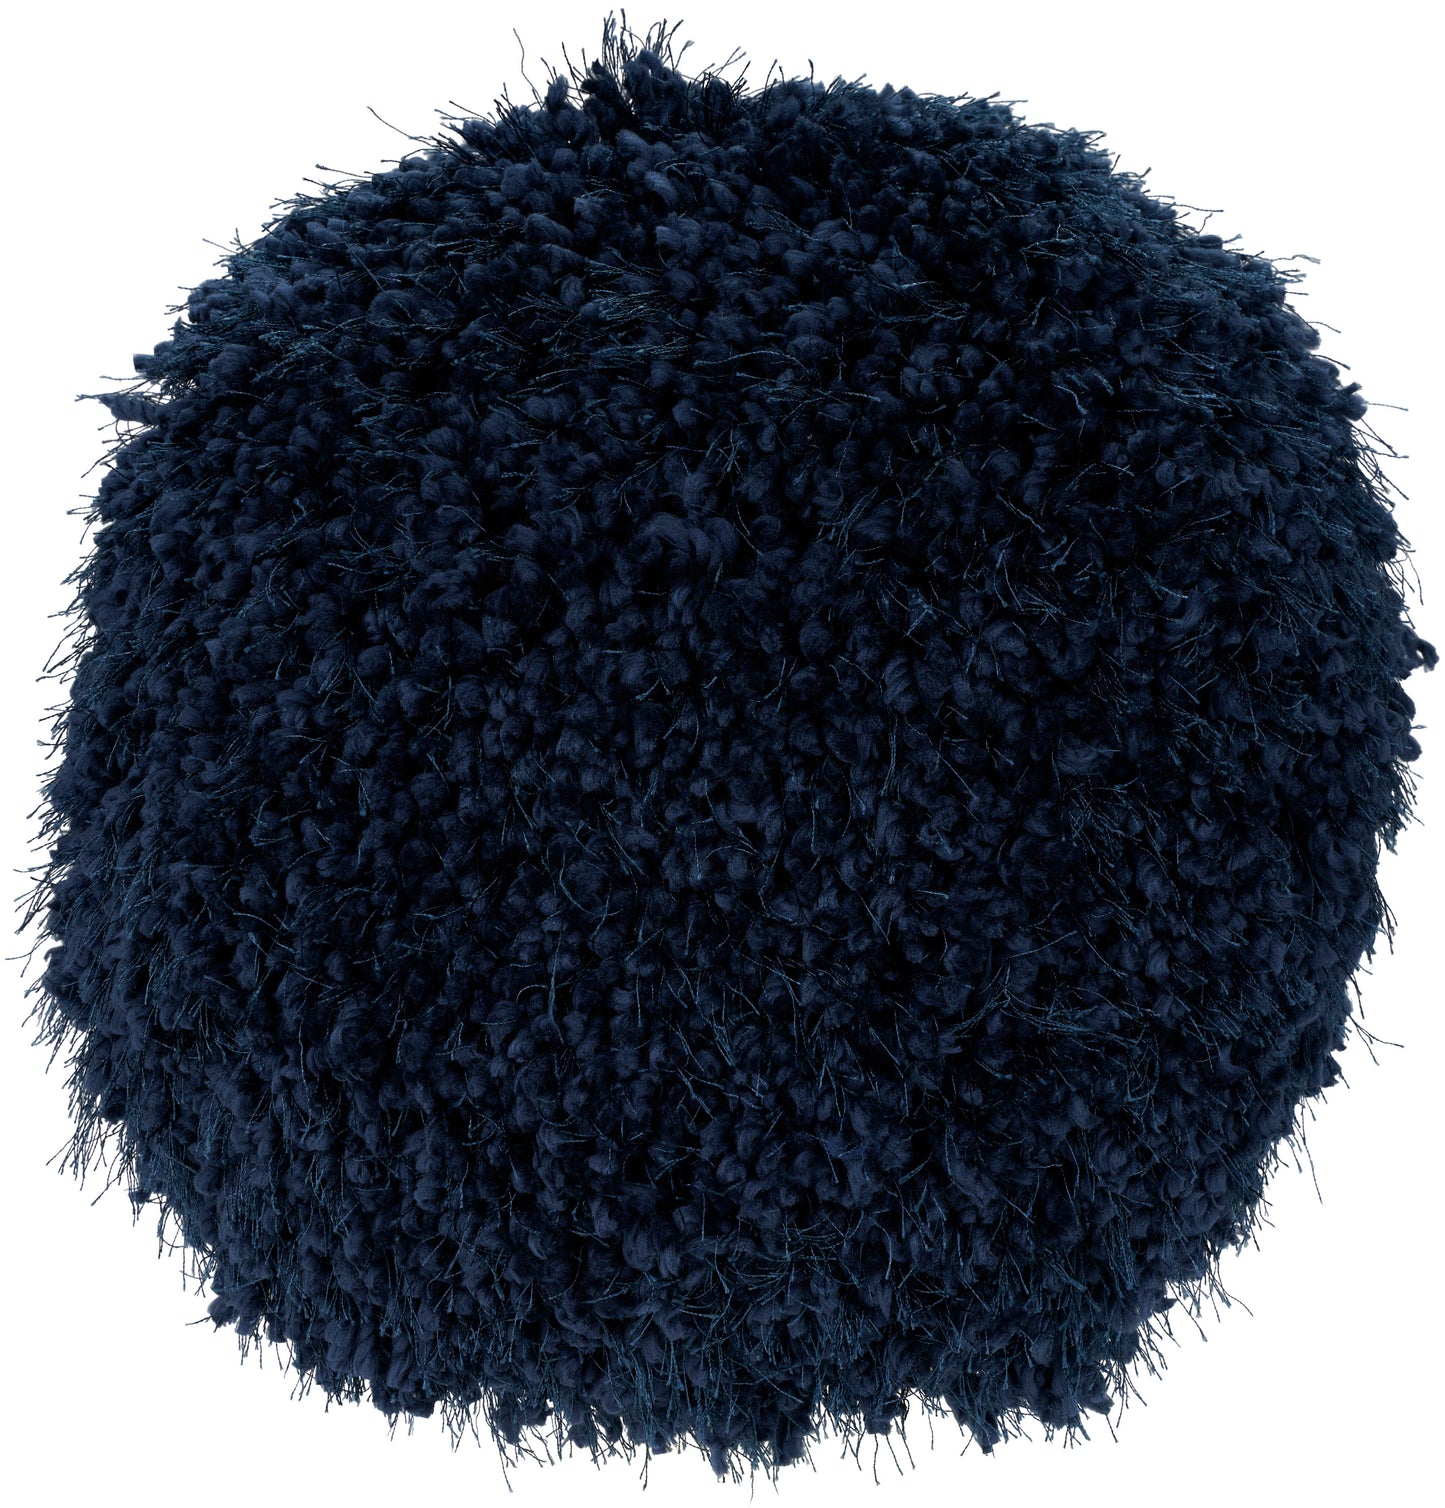 Shag TL003 Synthetic Blend Lush Yarn Throw Pillow From Mina Victory By Nourison Rugs